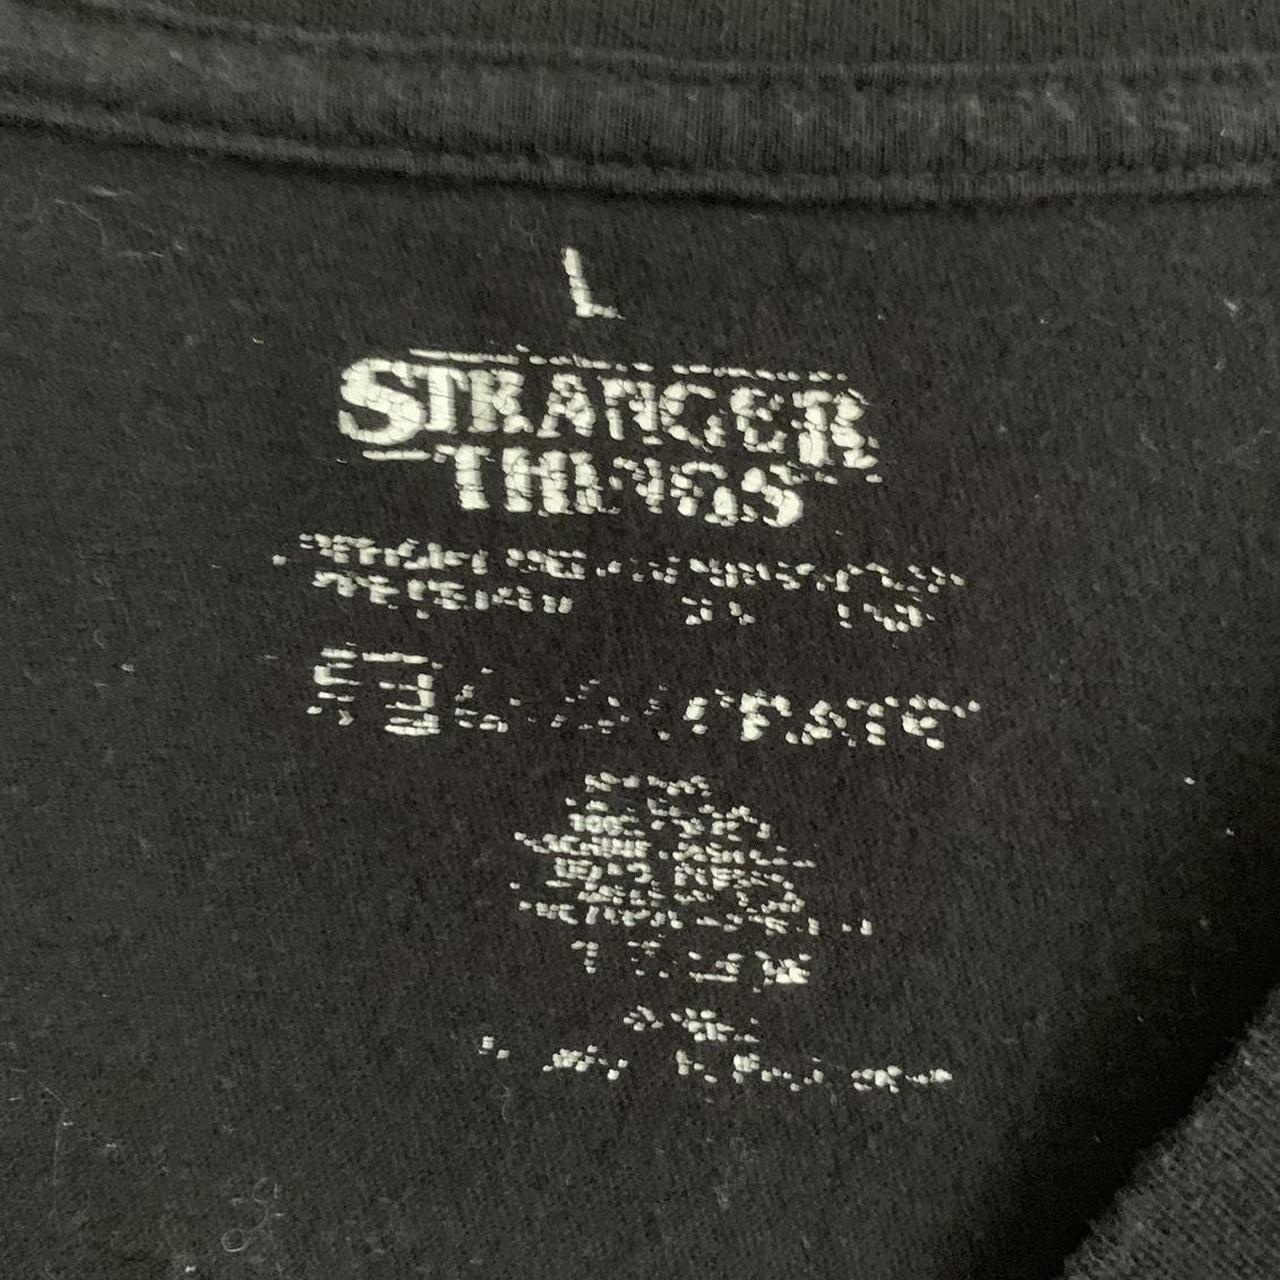 Netflix Stranger Things Eleven GraphicT-shirt Black Loot Crate